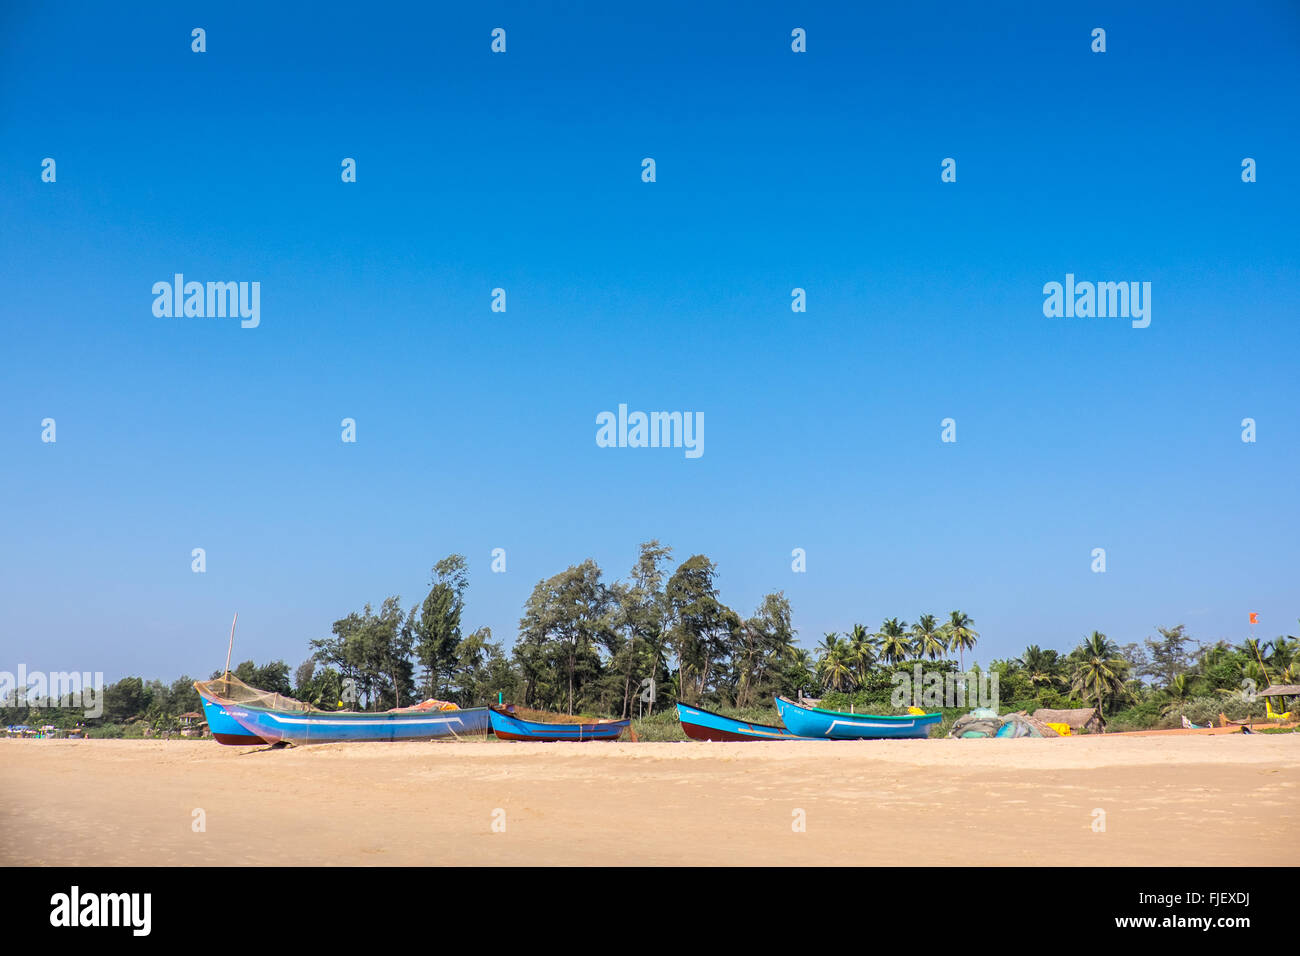 Brightly painted fishing boats on a beach in Kerala, India Stock Photo